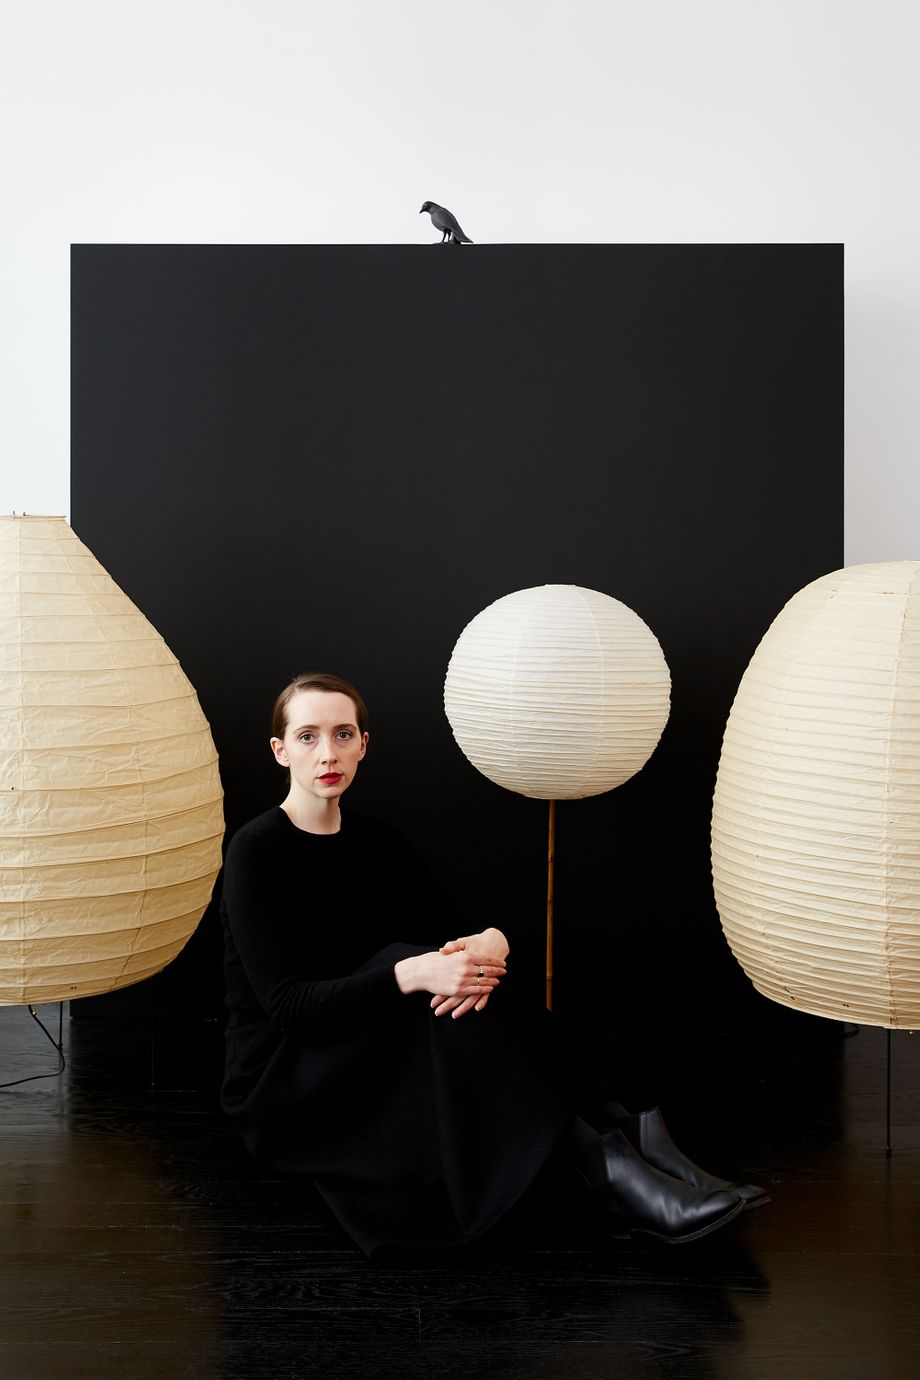 10 Glowy, Ethereal Paper Lights That Aren't by Noguchi